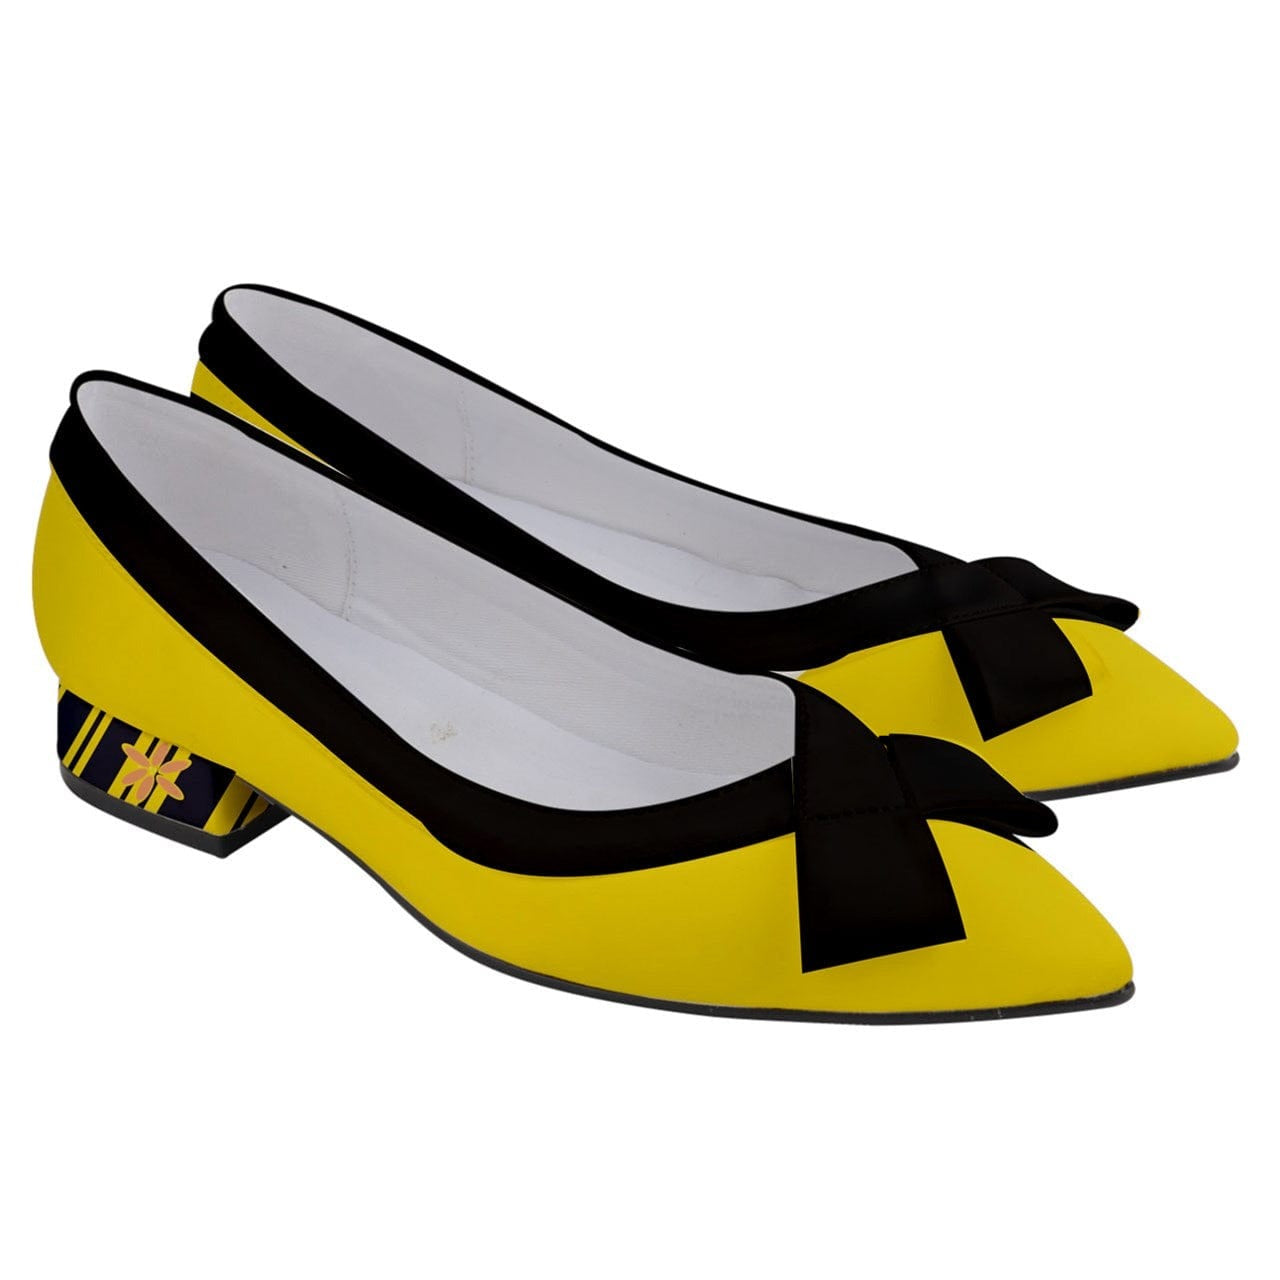 the-wheaten-store-women-s-bow-low-heels-pointed-ballerinas-yellow-and-black-heeled-sandals-33143235707077